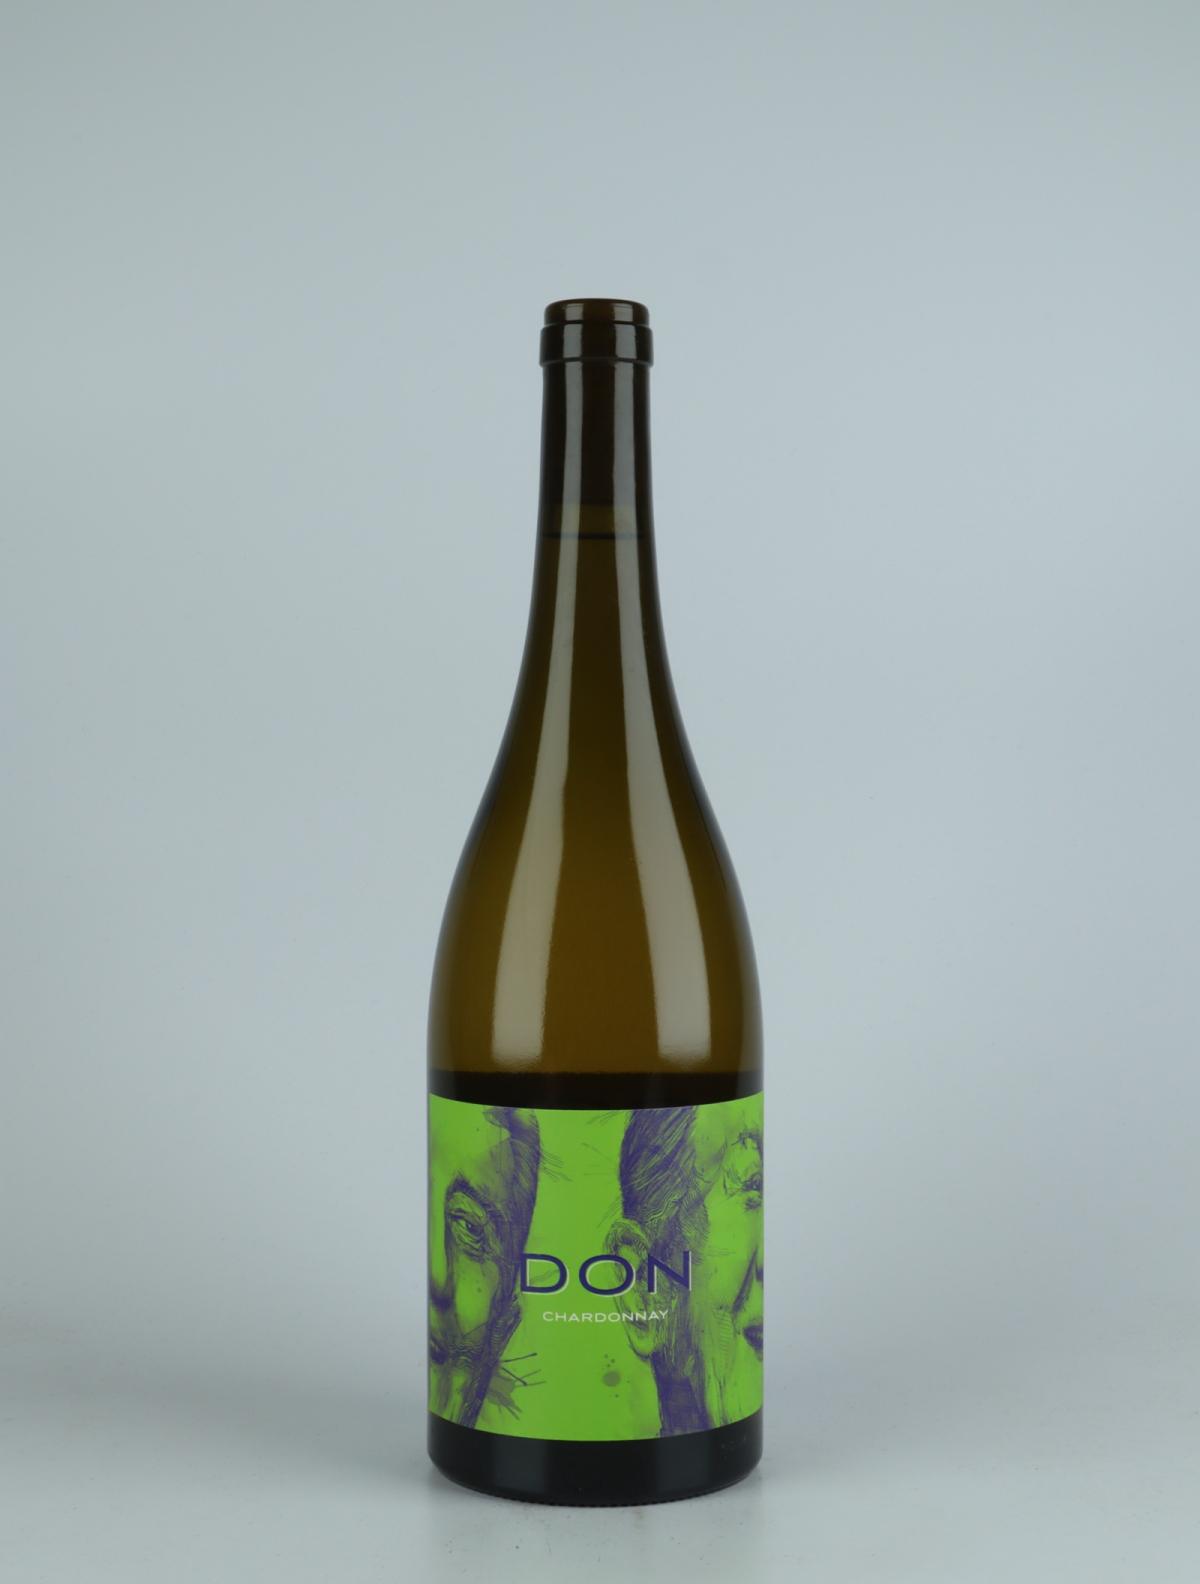 A bottle 2020 Nelson Chardonnay White wine from Don, Nelson in New Zealand